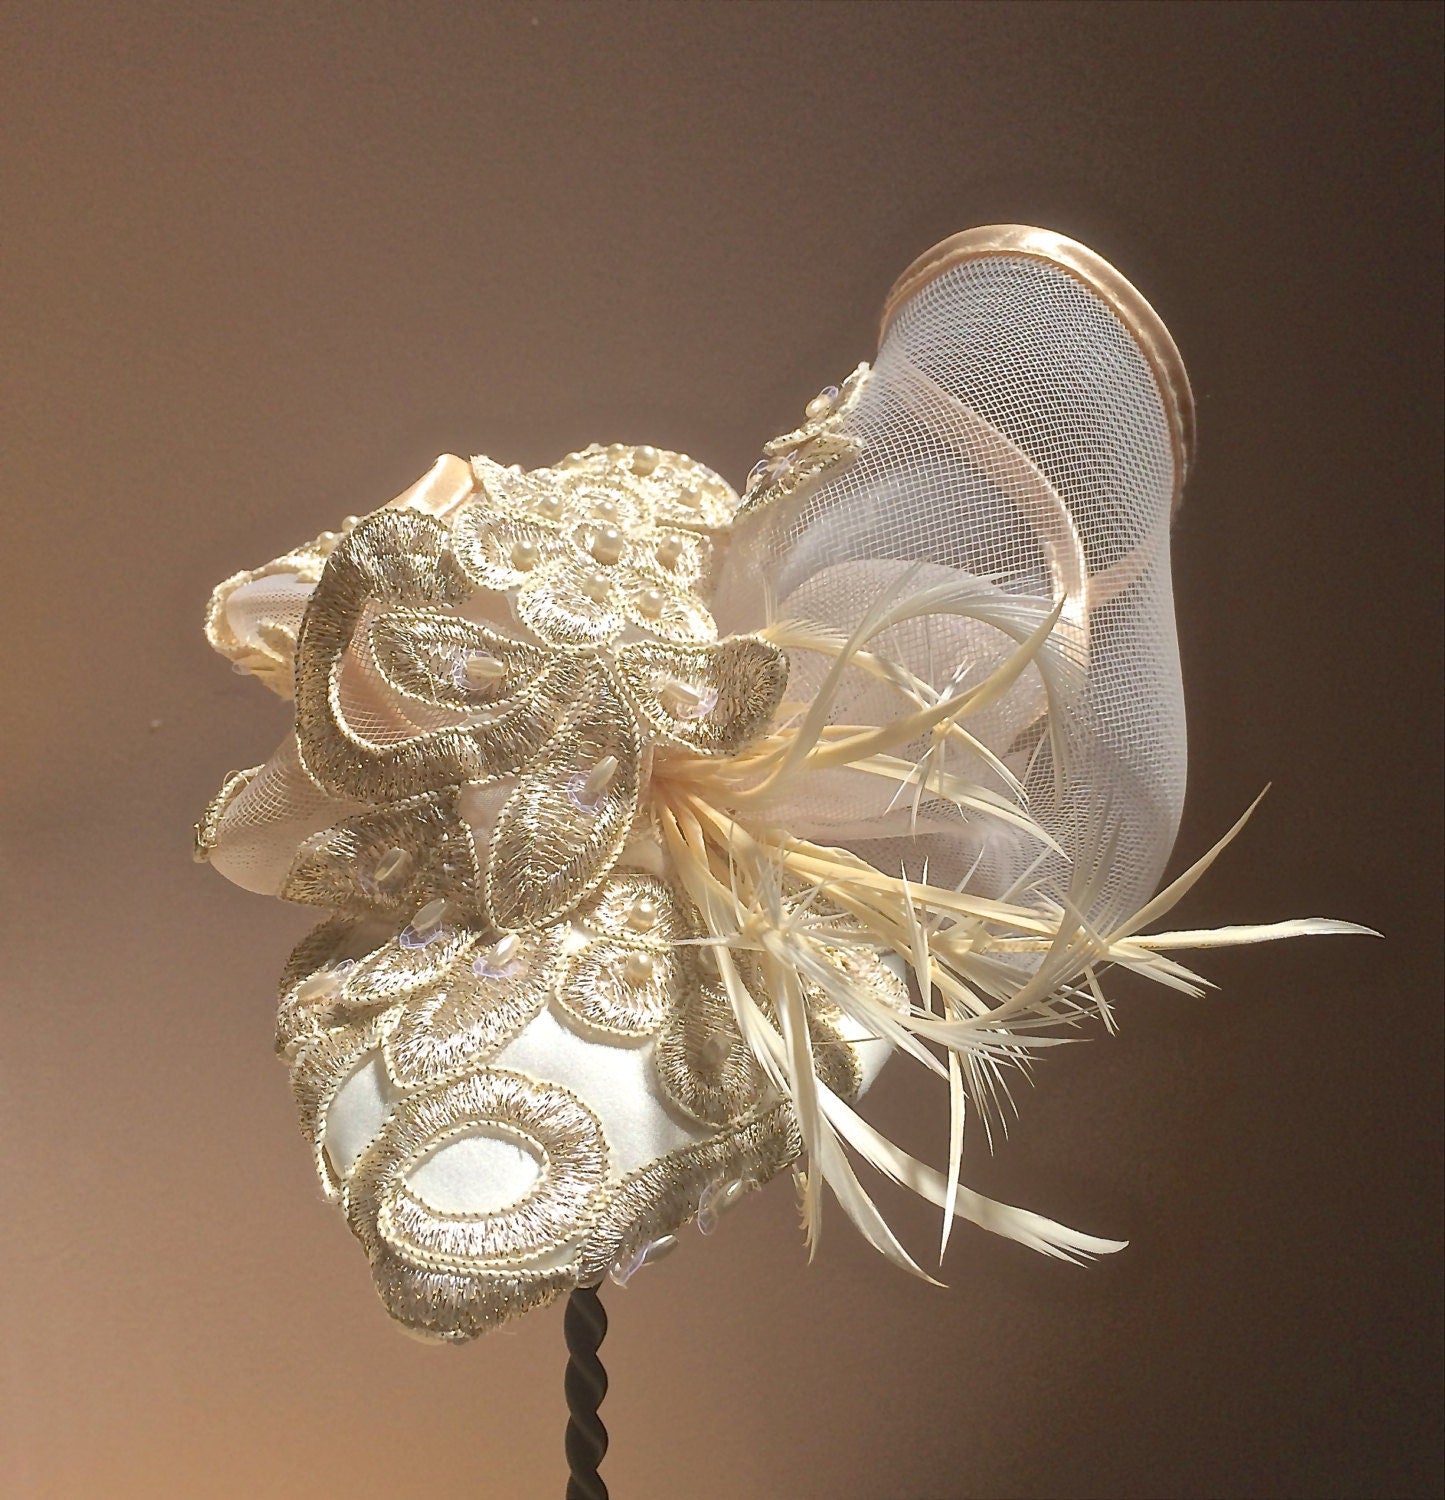 Ivory Embroidered Lace Fascinator with Gold Metallic threads and Pearls. Embellished with Feathers and Silk Trimmed Crinoline.